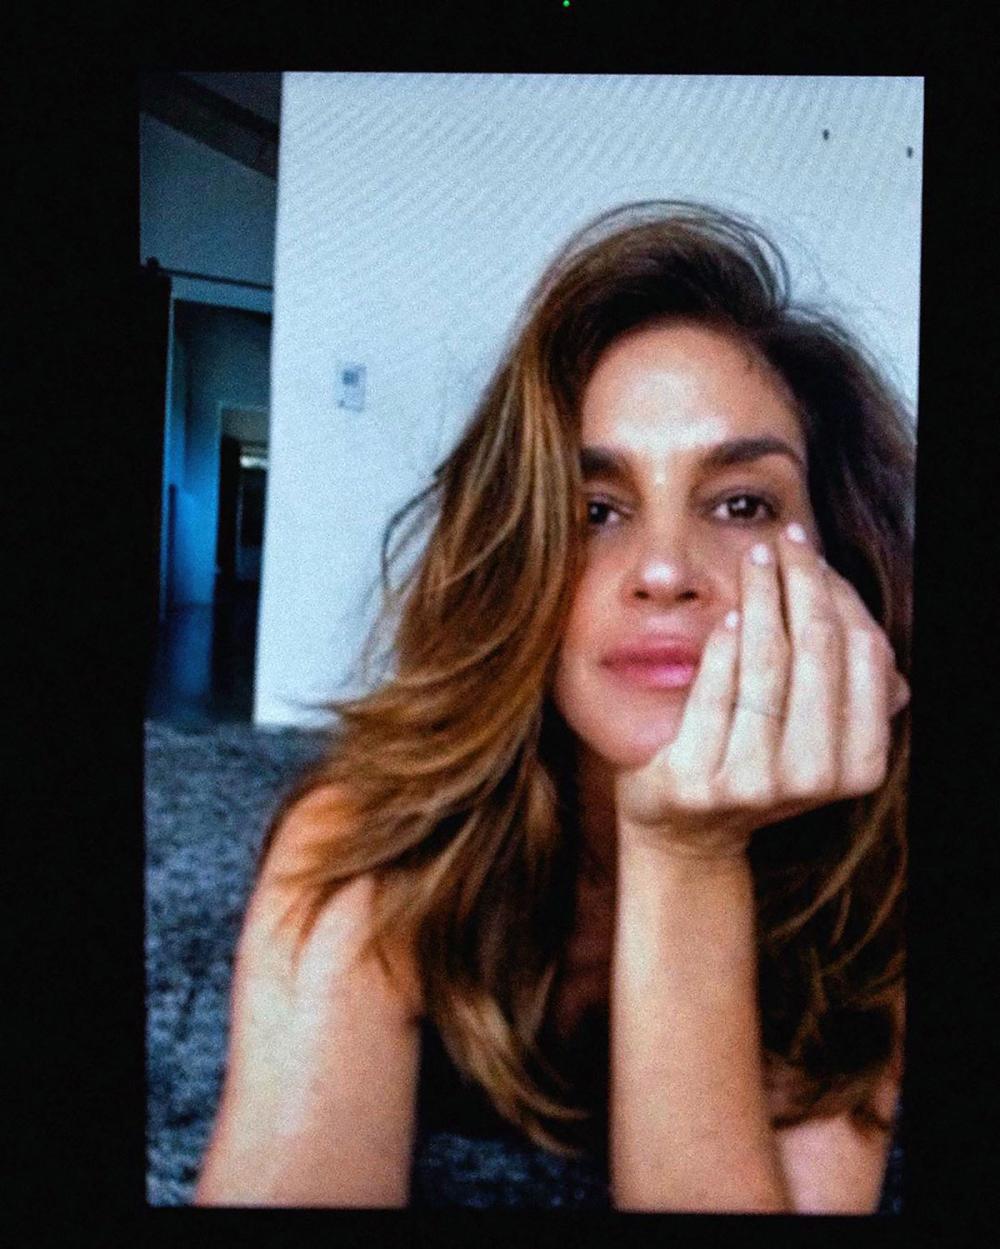 Cindy Crawford Does a New Kind of Photoshoot in Quarantine